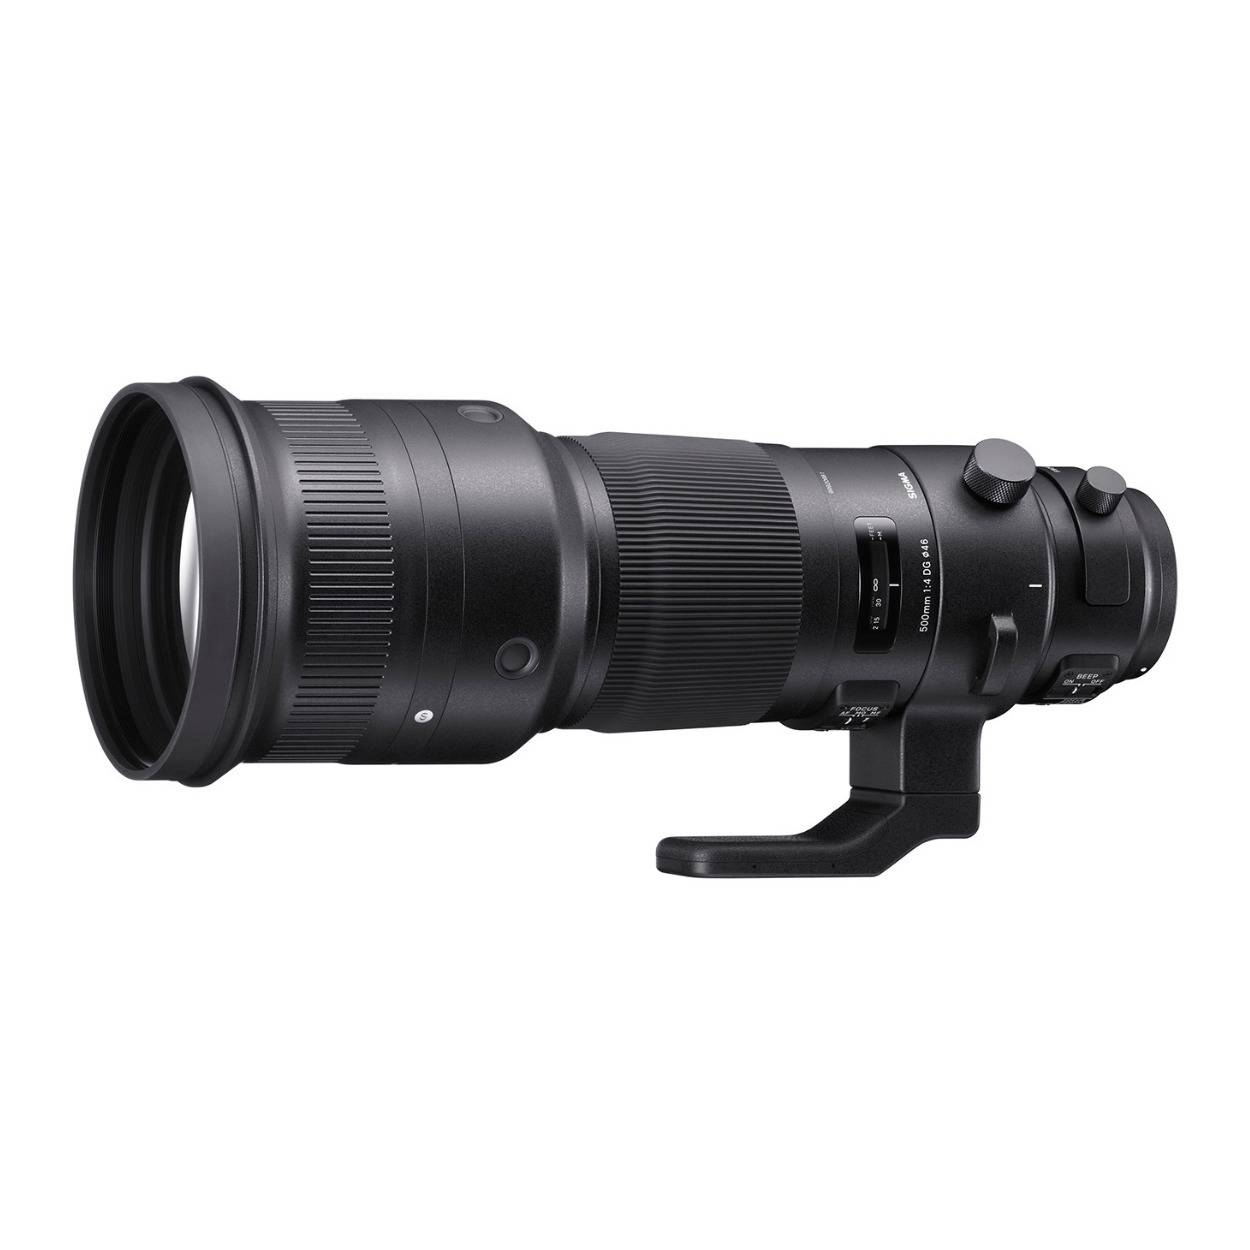 Sigma 500mm f/4 DG OS HSM Sports Lens for Canon Mount